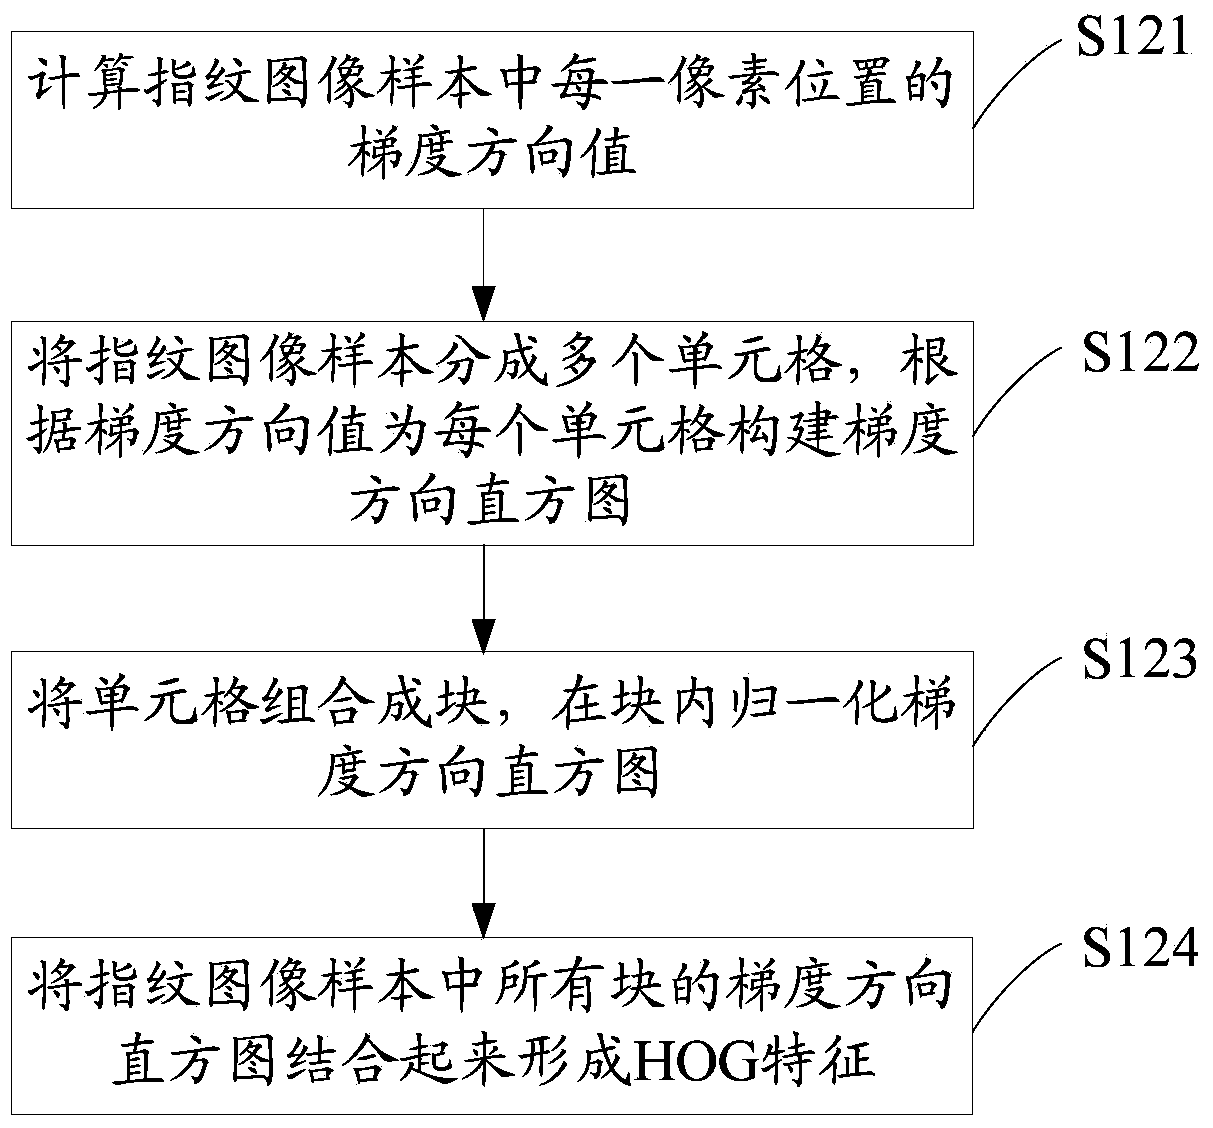 Judgment method and device for quality of fingerprint images